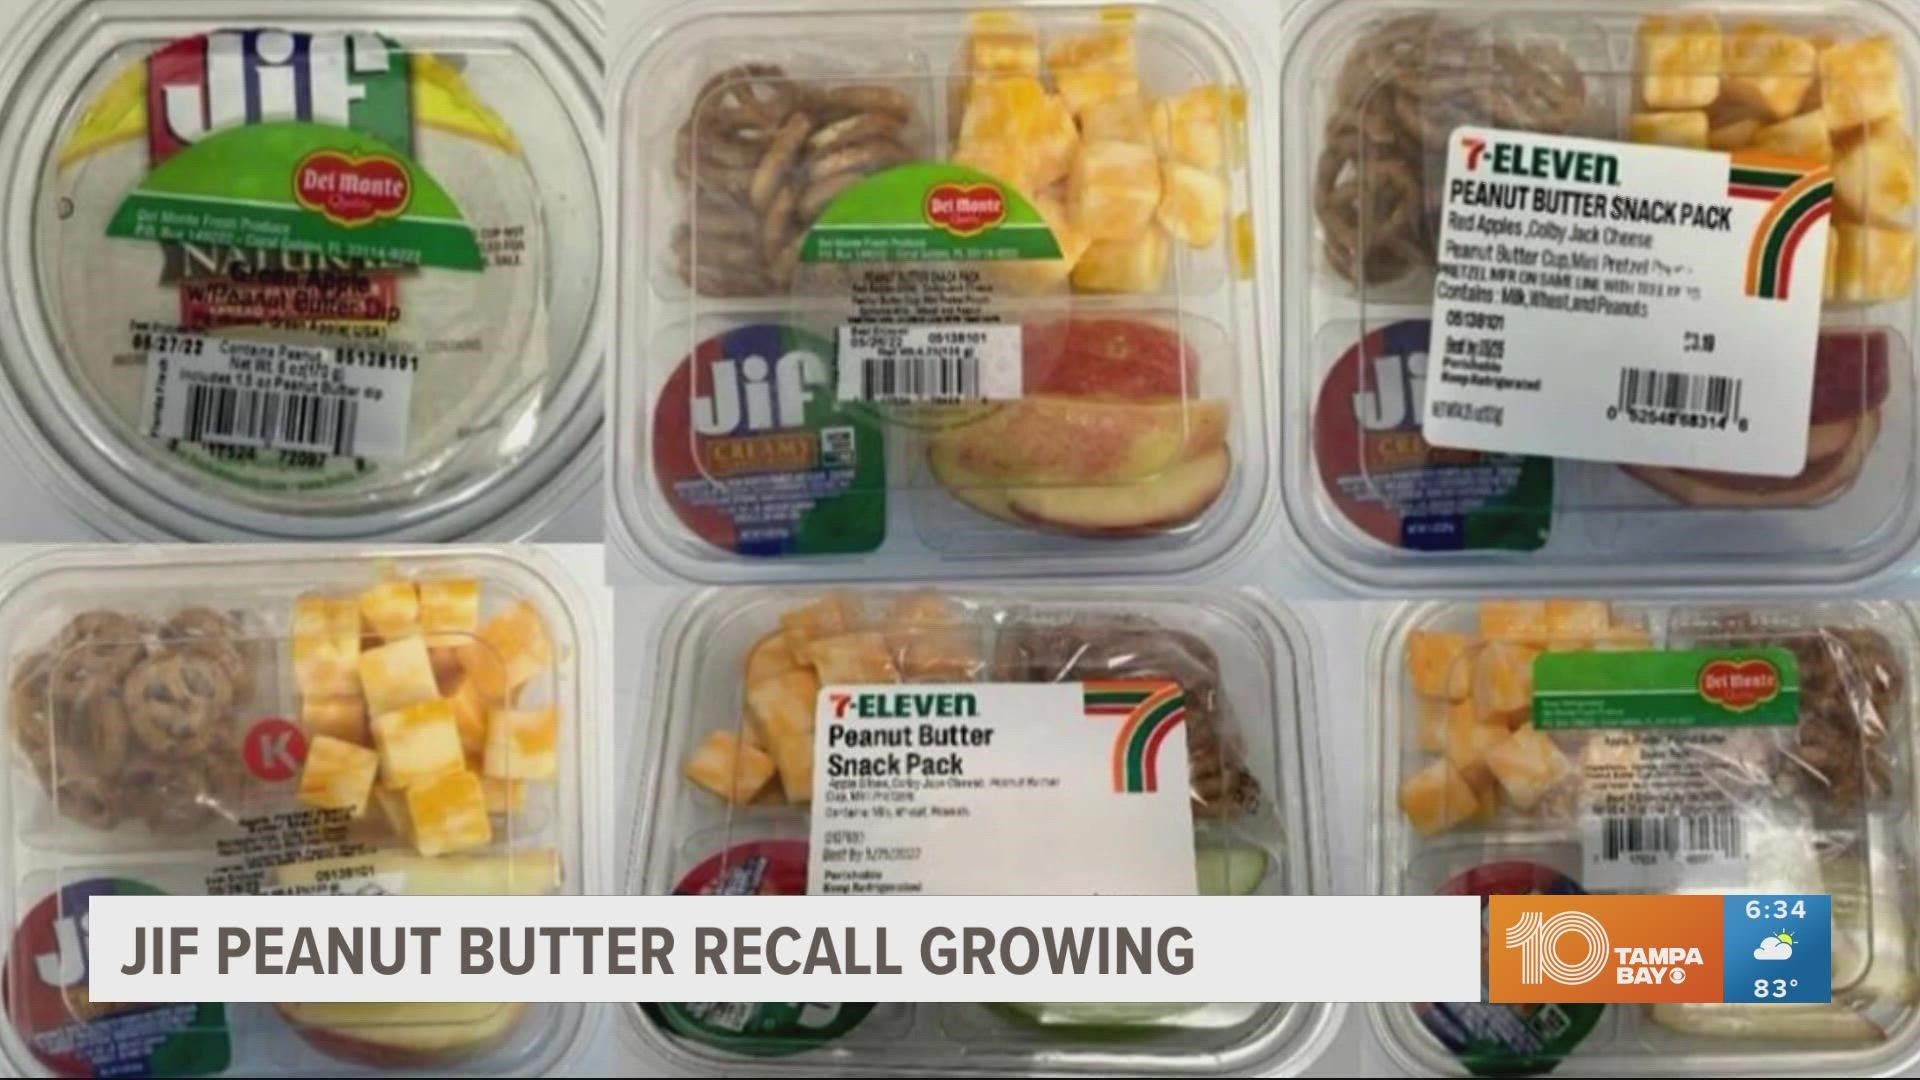 The Jif peanut butter recall is expanding to include more than just jars of peanut butter.